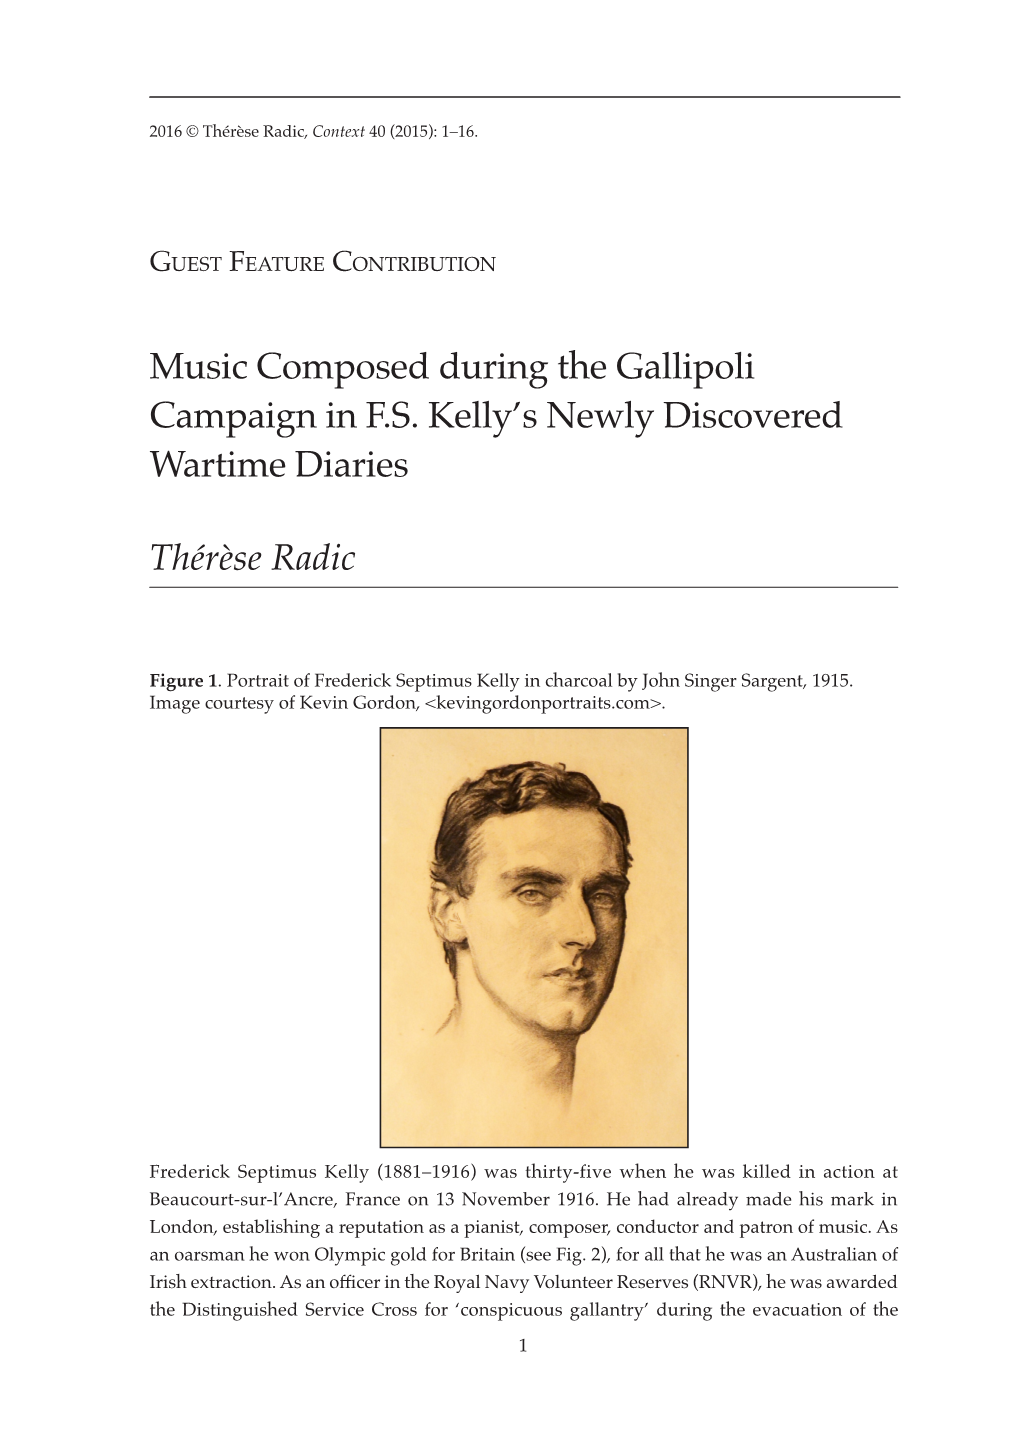 Music Composed During the Gallipoli Campaign in F.S. Kelly's Newly